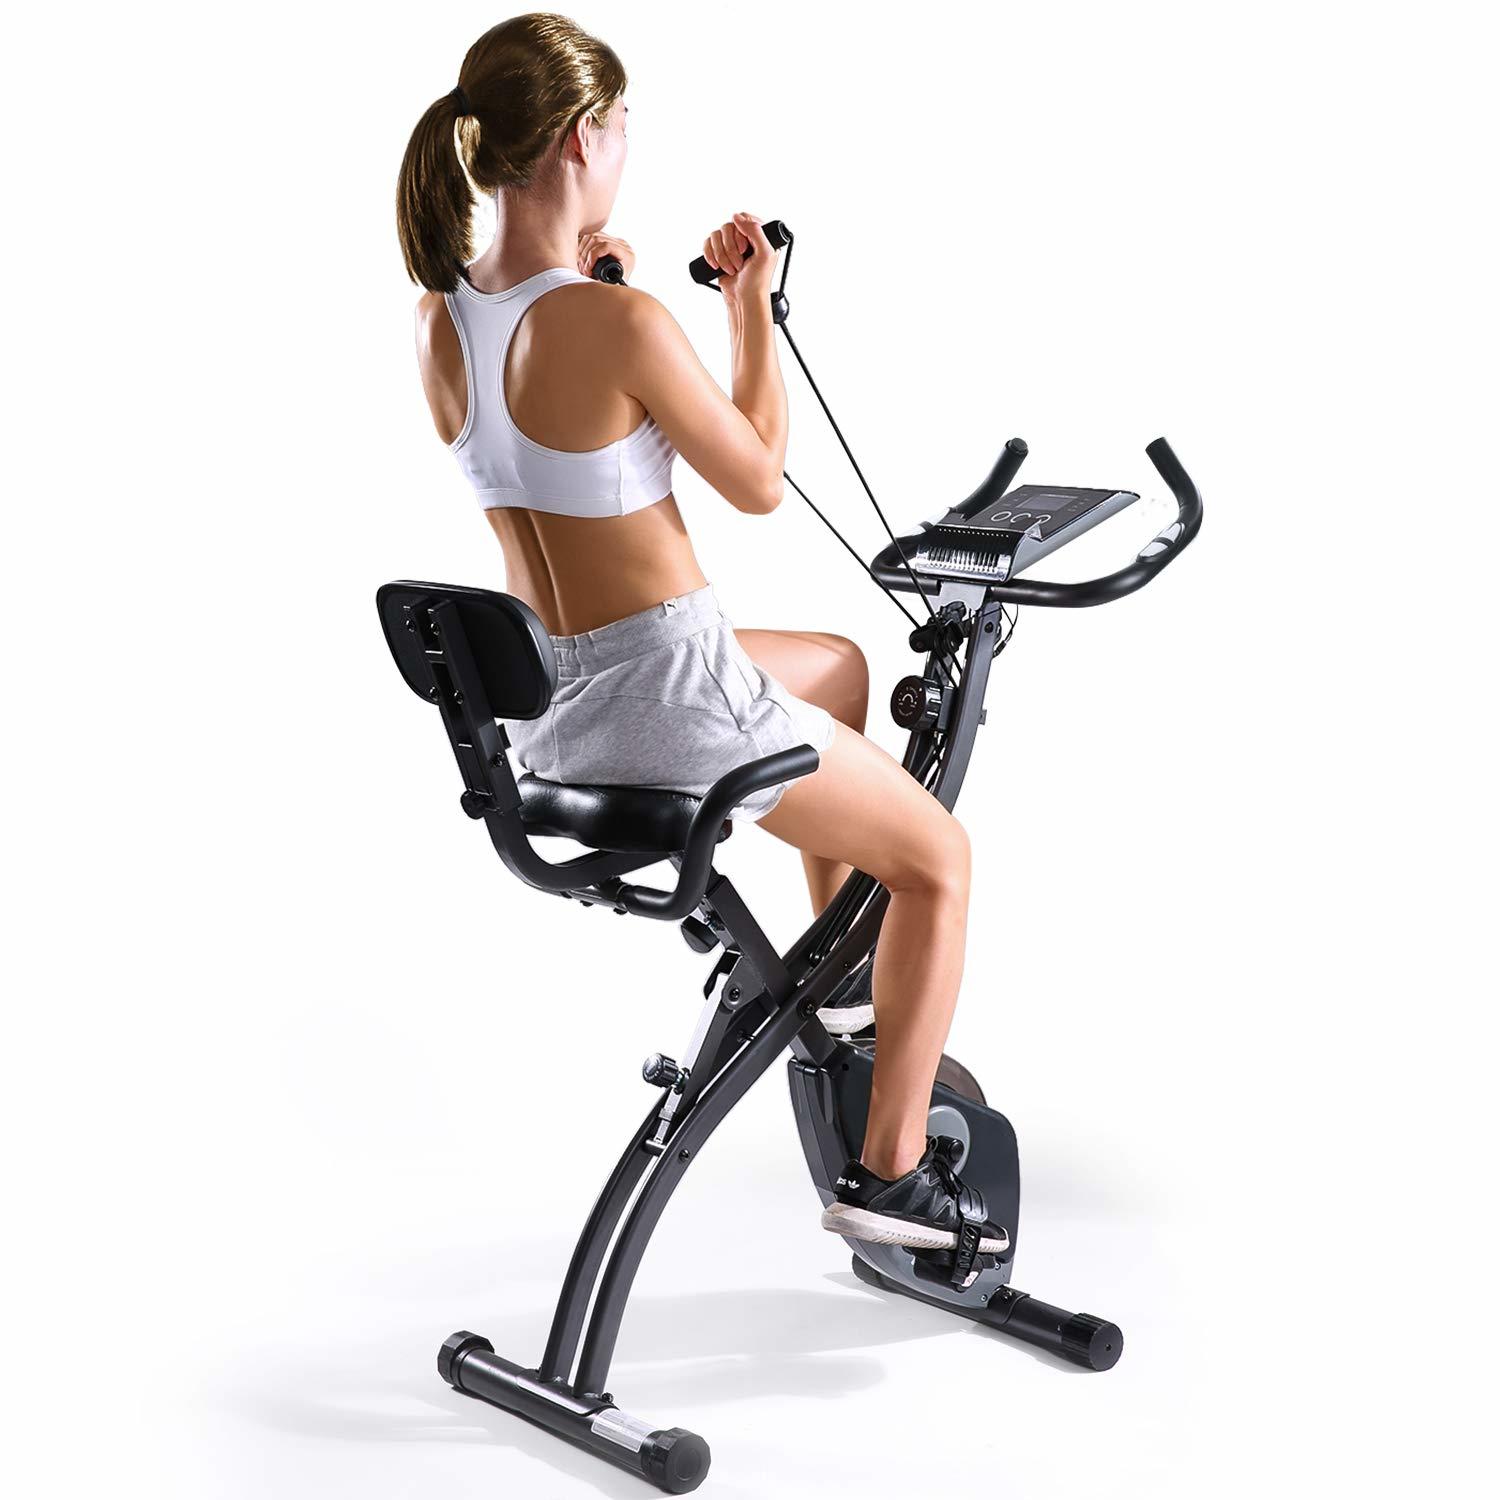 Walmart is practically giving away this three-in-one exercise bike for just over $100